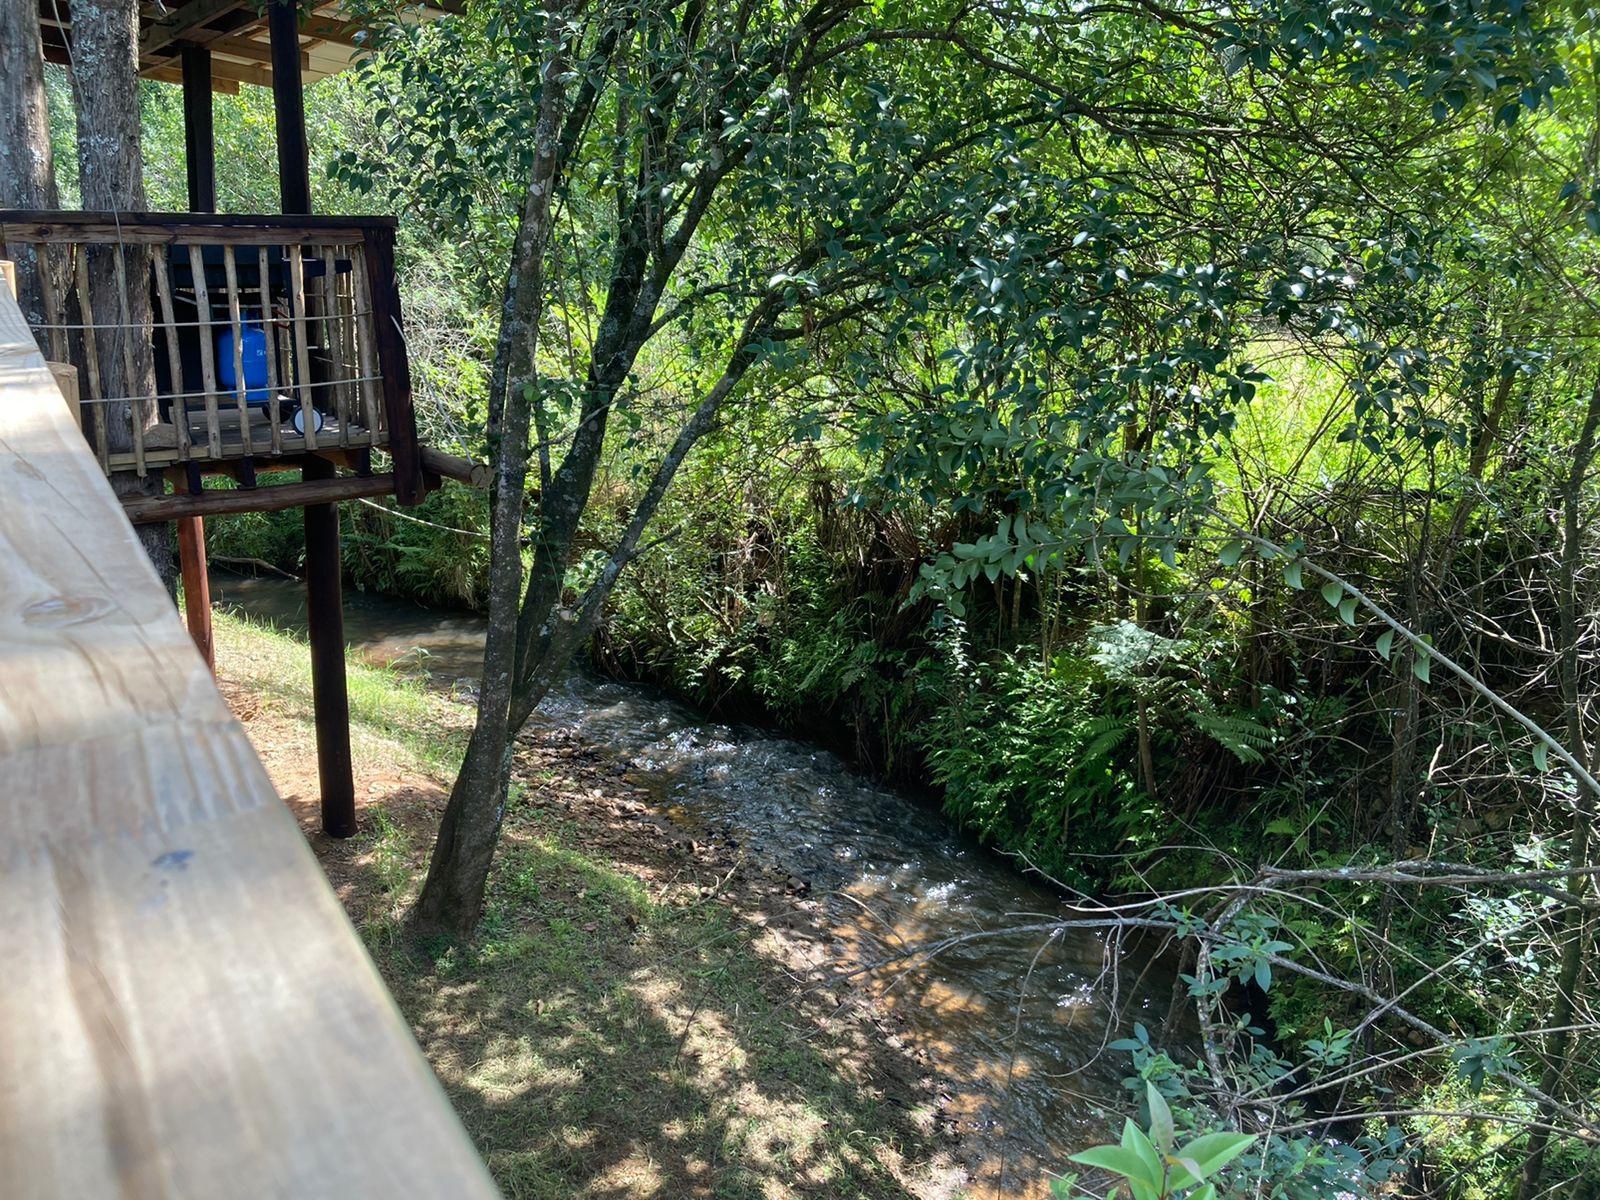 Gunyatoo Trout Farm And Guest Lodge Sabie Mpumalanga South Africa Bridge, Architecture, River, Nature, Waters, Tree, Plant, Wood